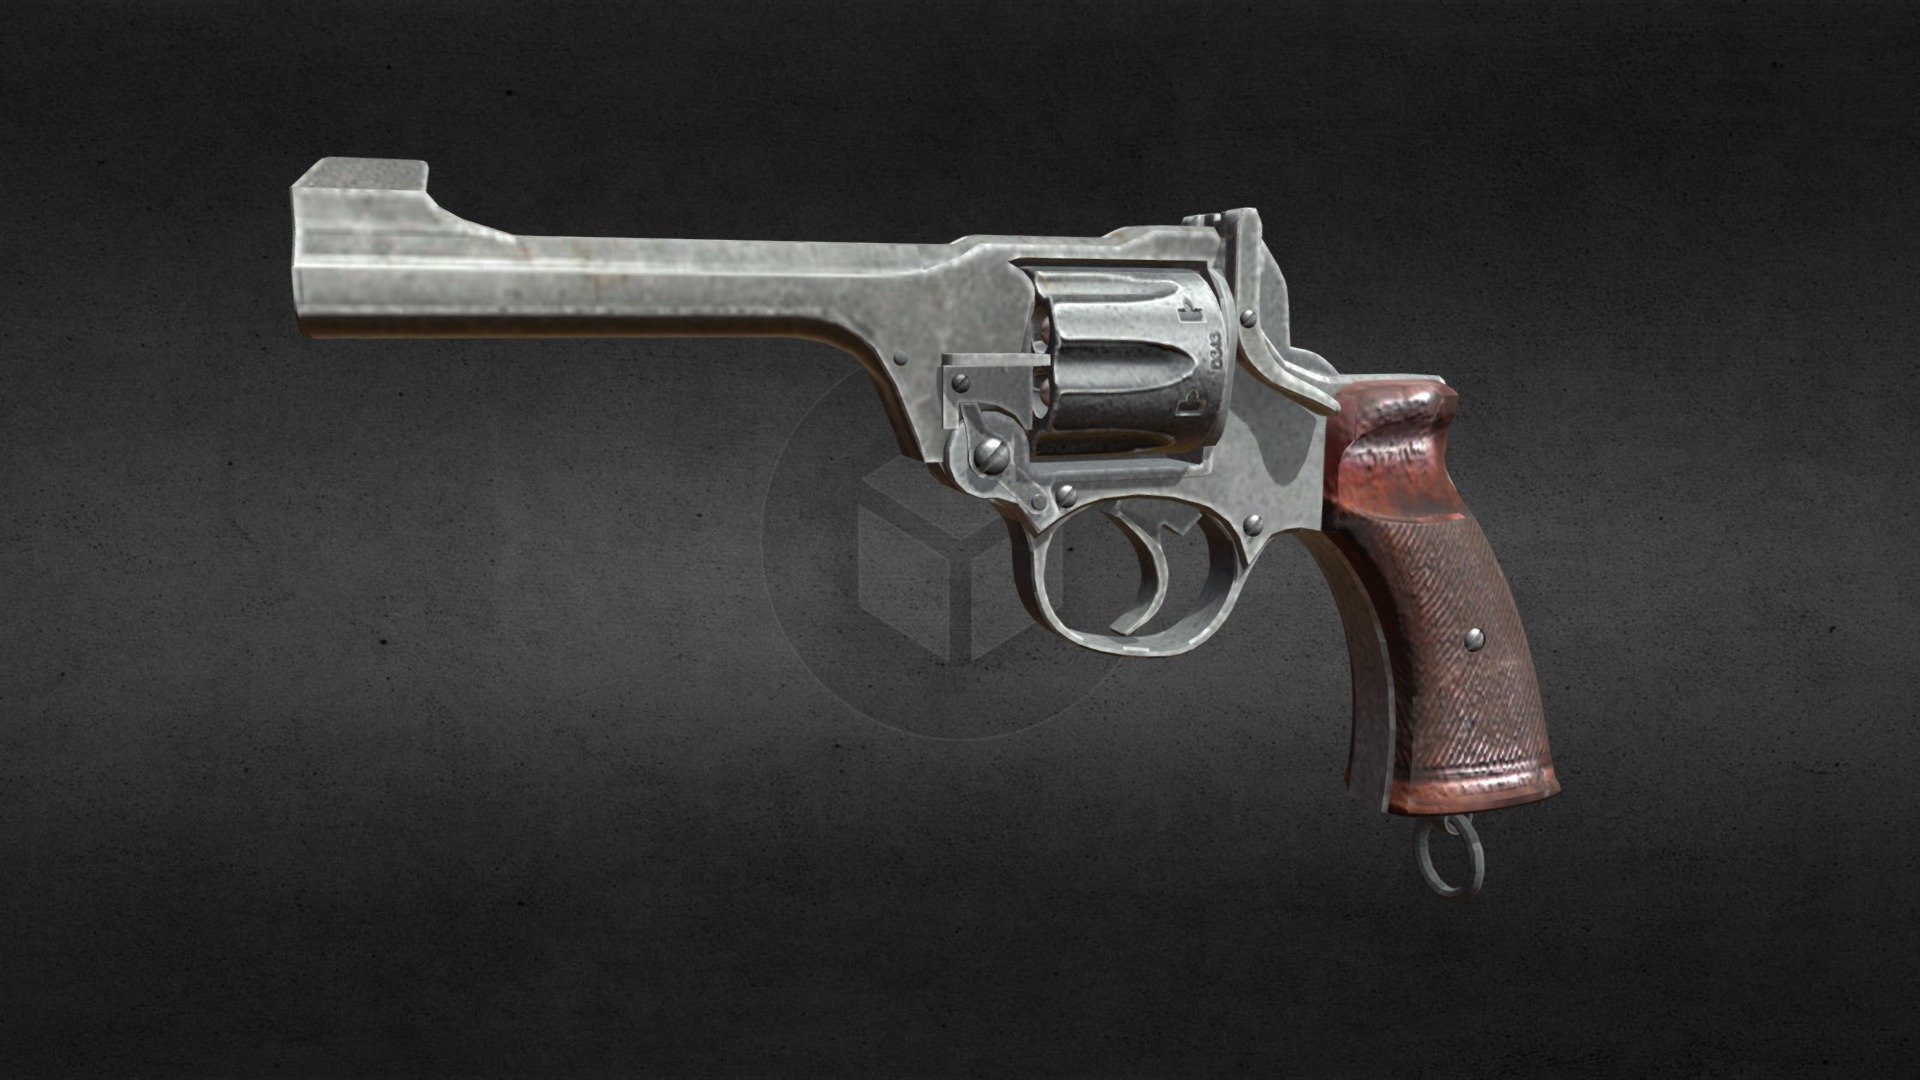 The .476 calibre Enfield Mk I and Mk II revolvers were the official sidearm of both the British Army and the North-West Mounted Police—as well as being issued to many other Colonial units throughout the British Empire—and the later model .38/200 Enfield No. 2 Mk I revolver was the standard British/Commonwealth sidearm in the Second World War, alongside the Webley Mk IV and Smith &amp; Wesson Victory Model revolvers chambered in the same calibre. The term &ldquo;Enfield Revolver